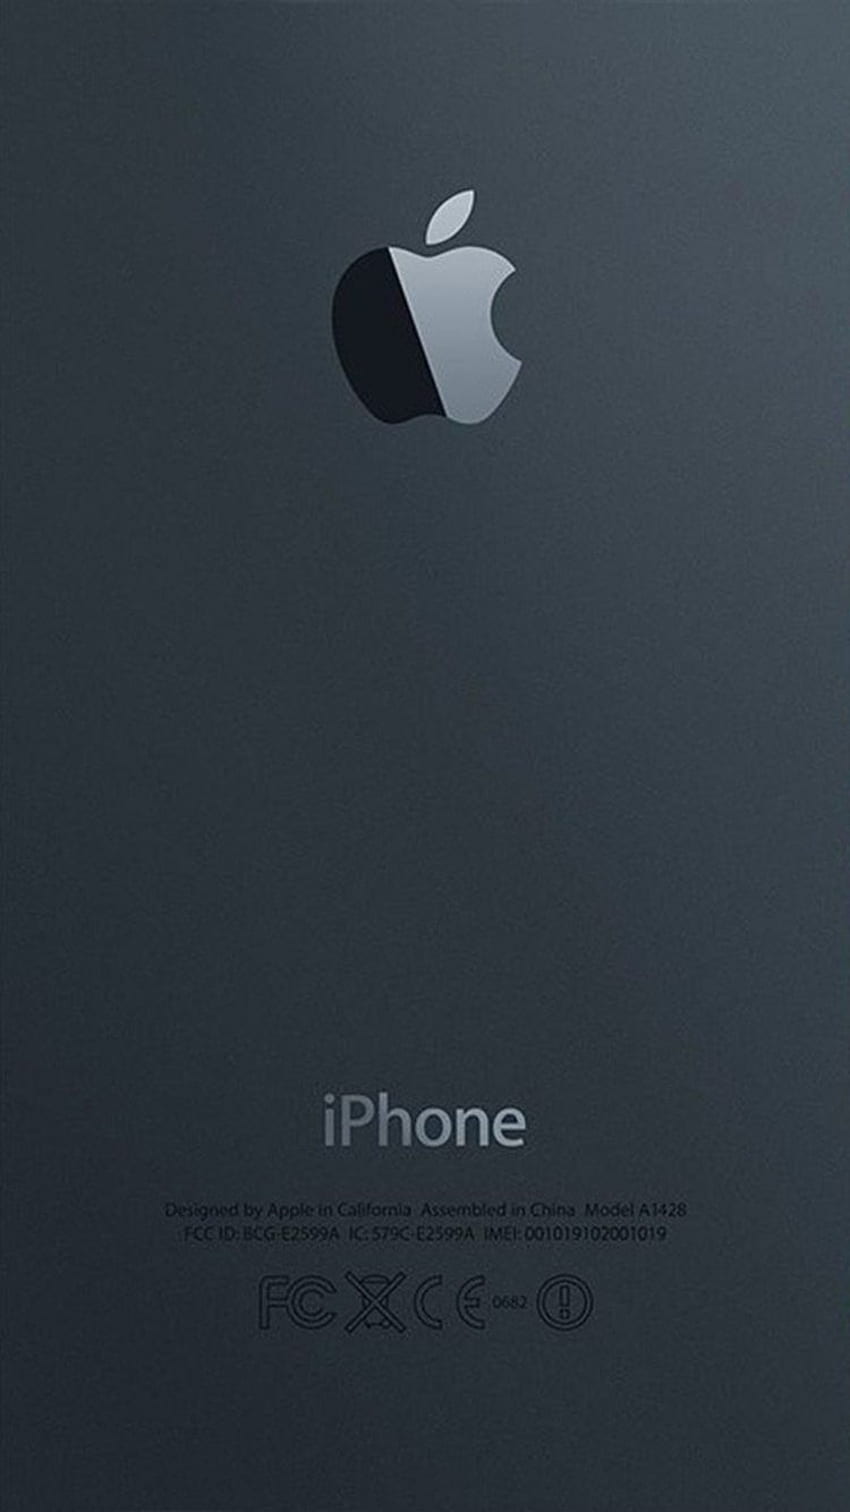 iPhone11papers.com | iPhone11 wallpaper | at32-back-iphone7-black-apple -art-illustration